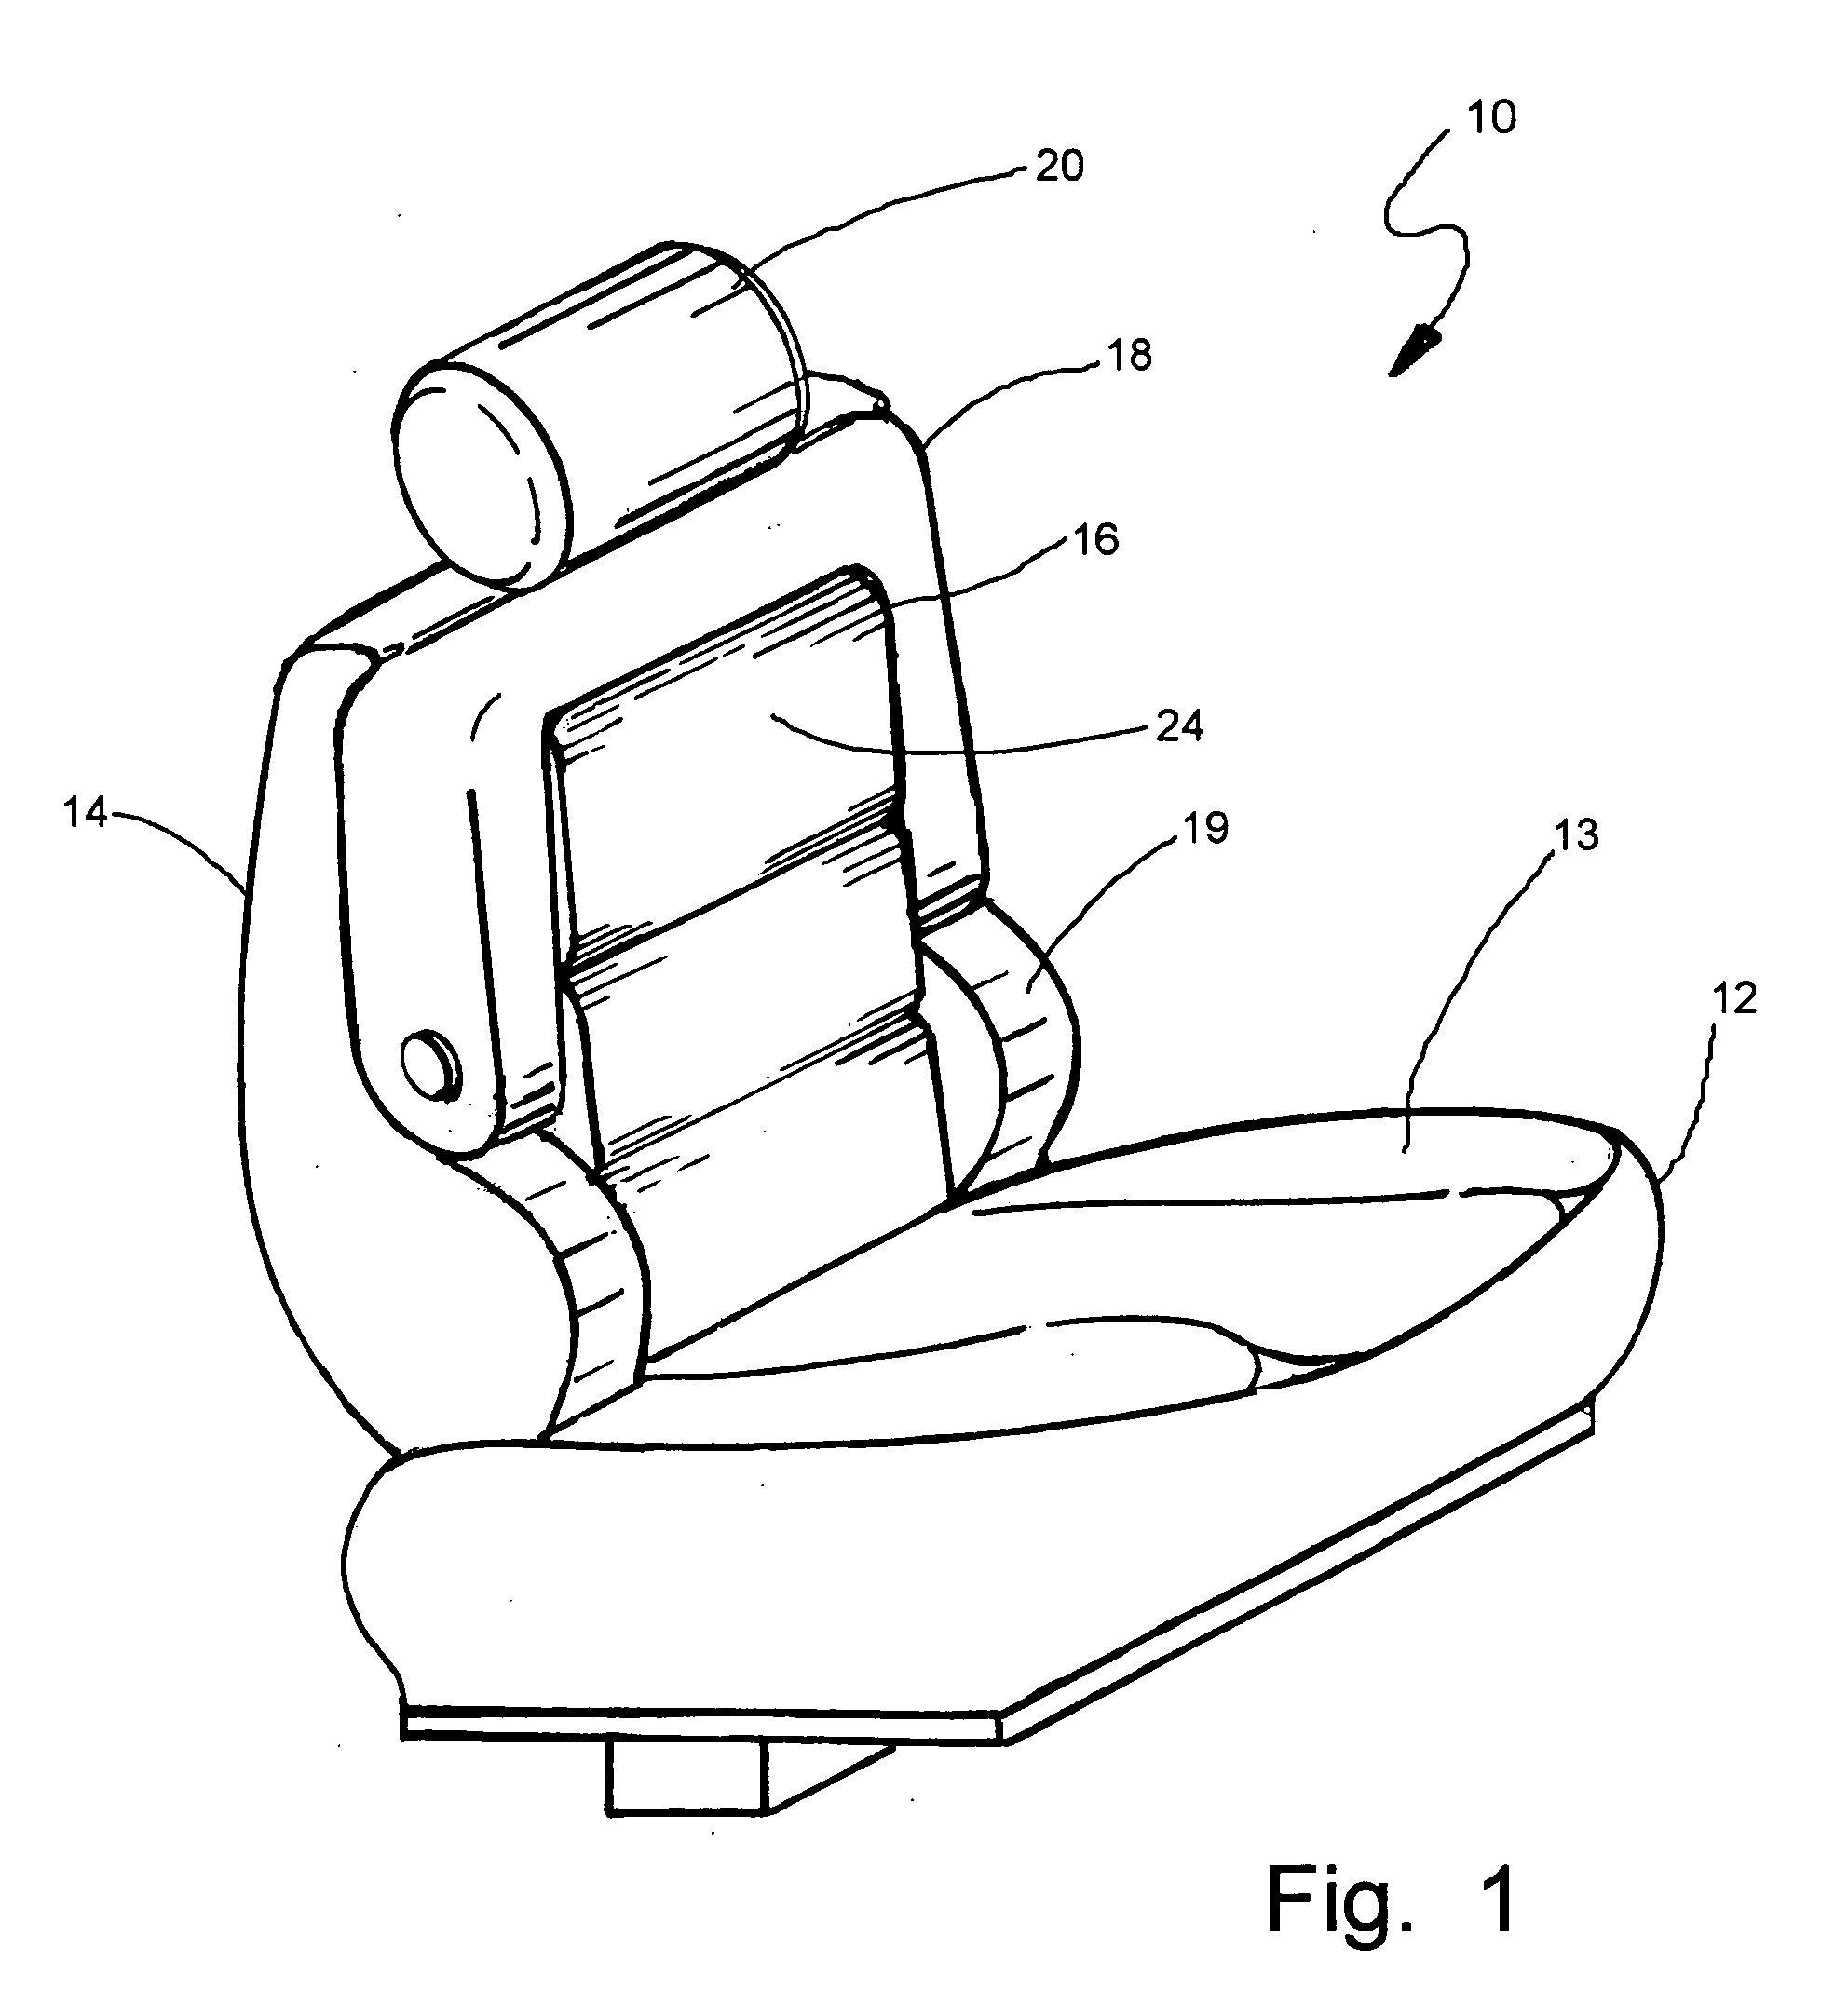 Vehicular seat assembly